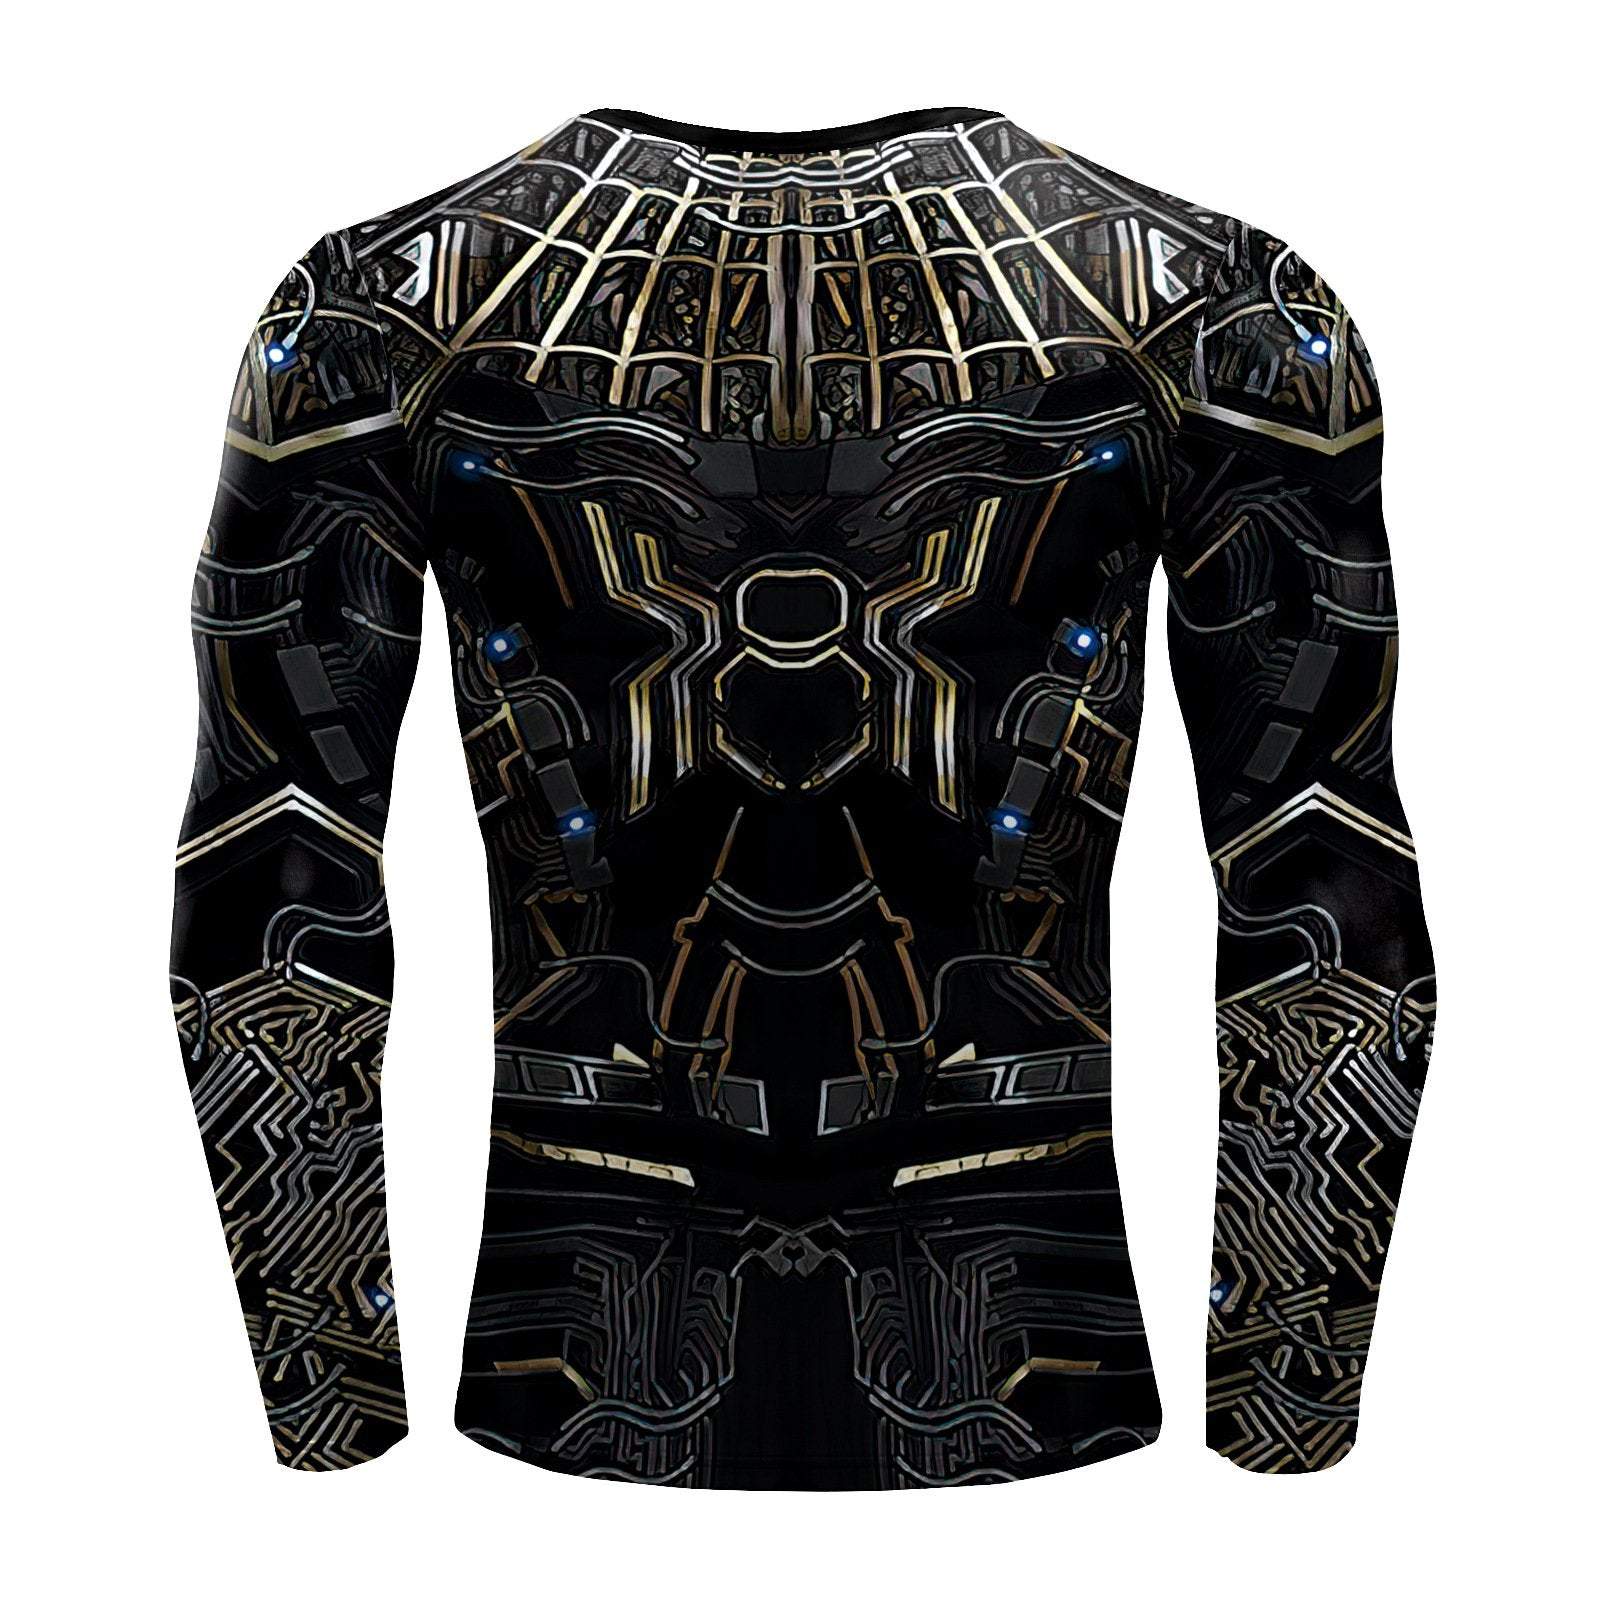 Spiderman T Shirt Cosplay Costume Long Sleeve Printed Top Casual Tight Sportswear Tee For Men